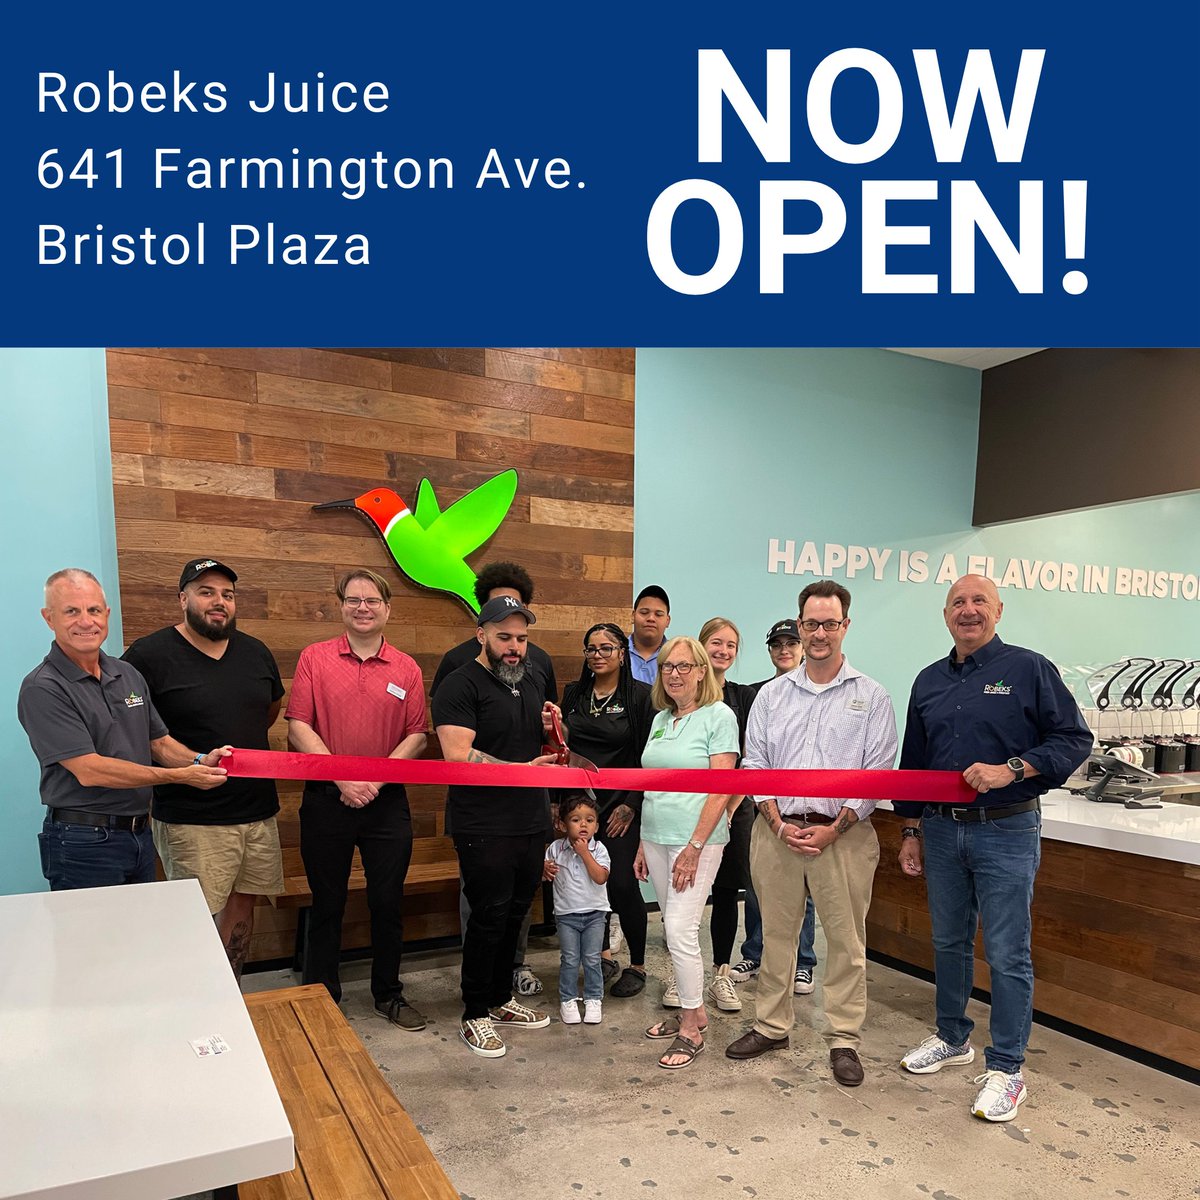 NOW OPEN! Visit Robeks Juice in the Bristol Plaza - Offering fresh juices and smoothies with a multitude of delicious options. Grand Opening Celebration is Saturday, 7/15! #ShopBristolCT #BristolAllHeart